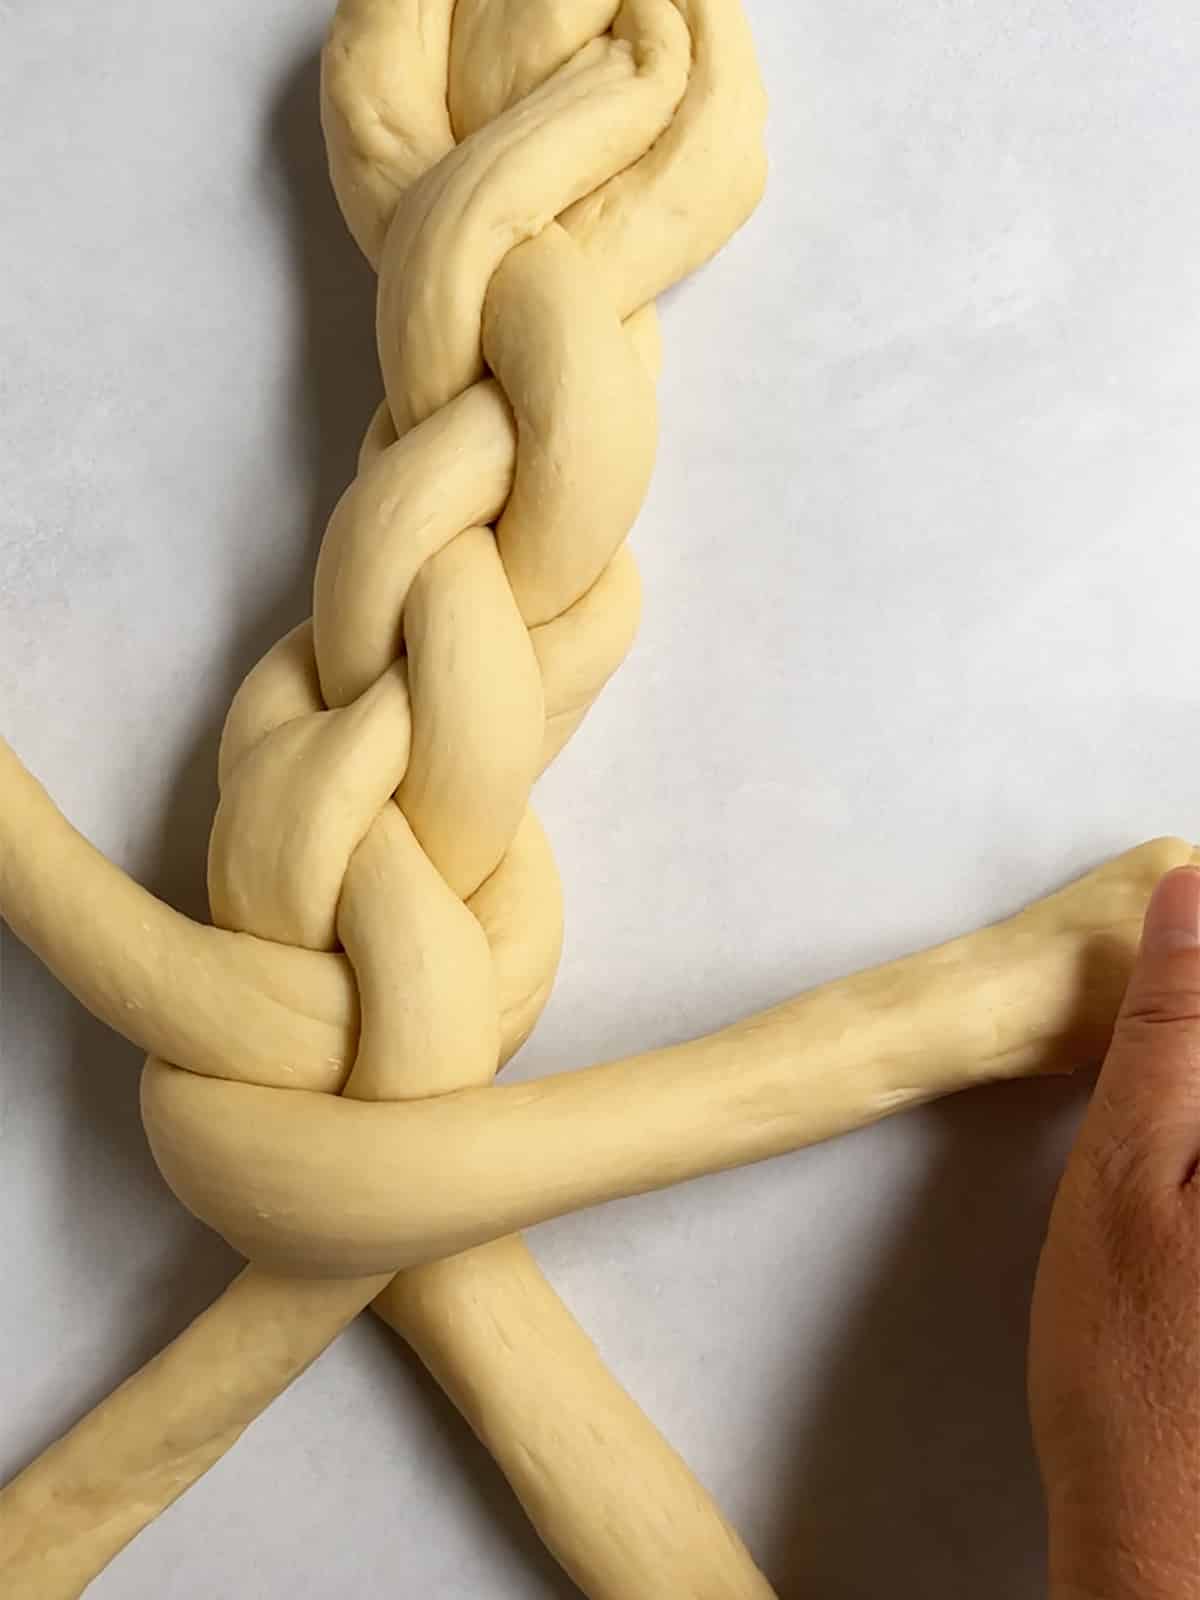 Braiding challah with 4 strands with one hand showing on the right.